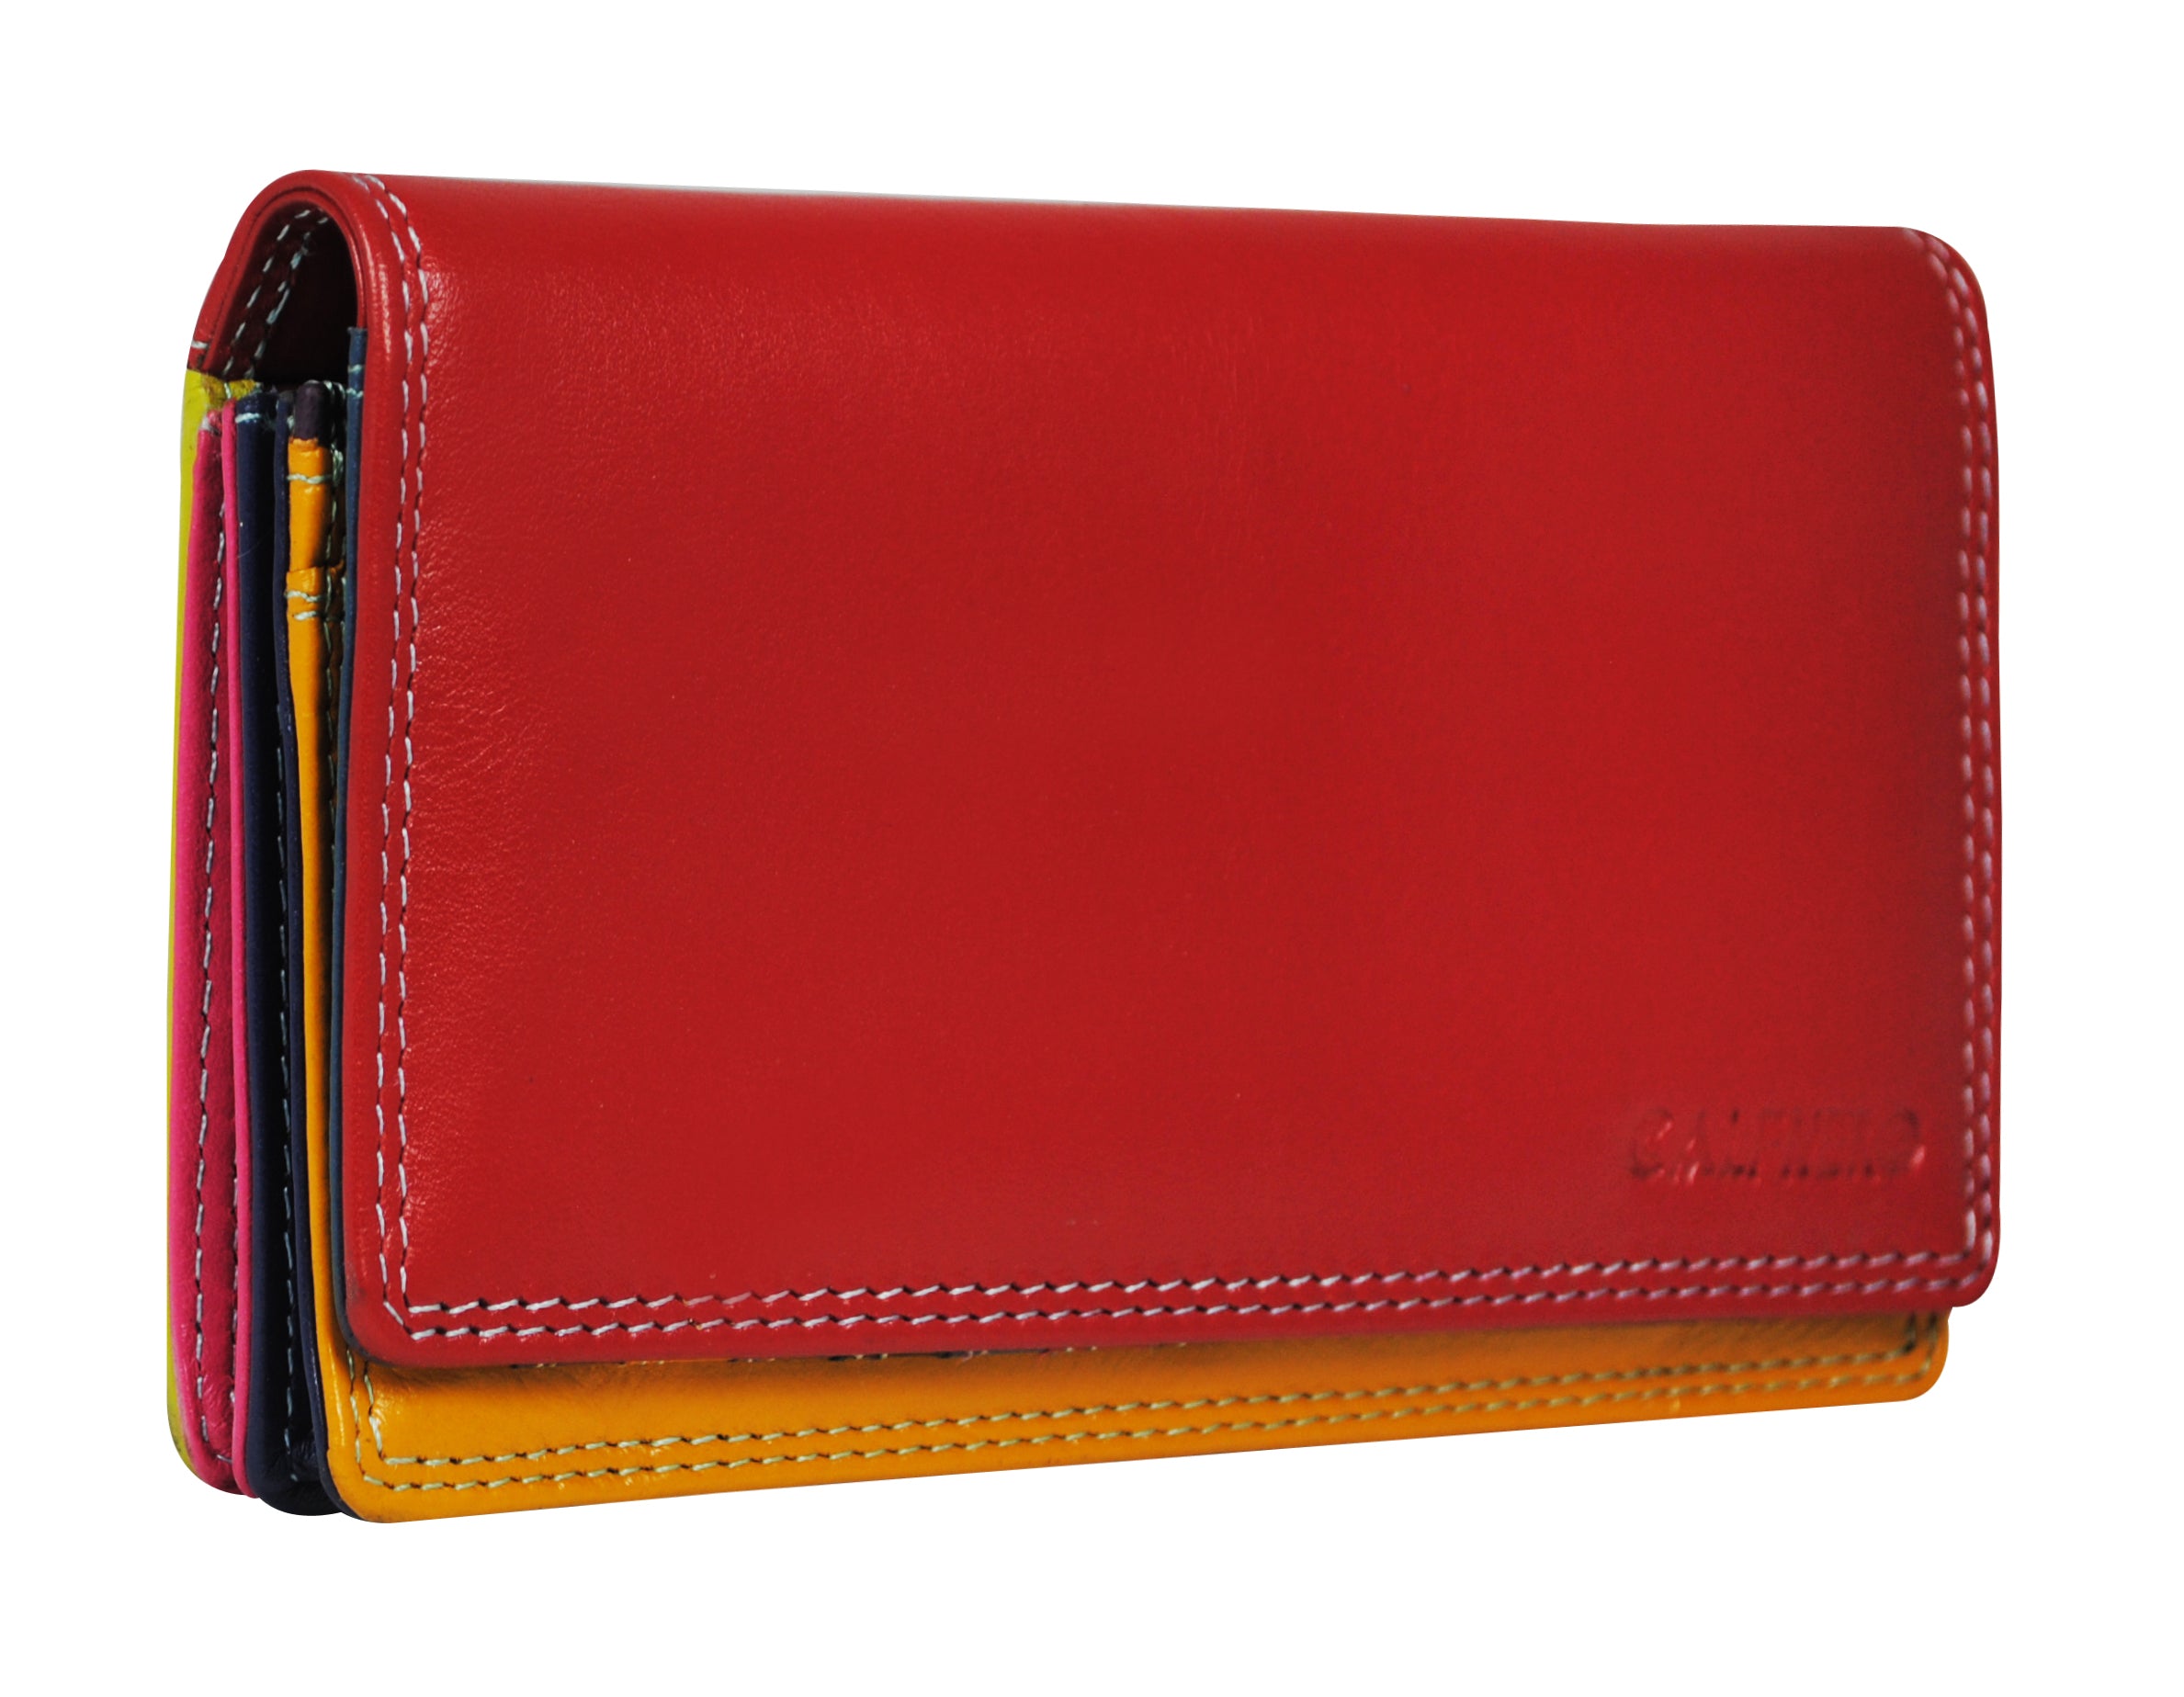 Red Color Womens Wallets: Buy Red Color Womens Wallets Online at Low Prices  on Snapdeal.com